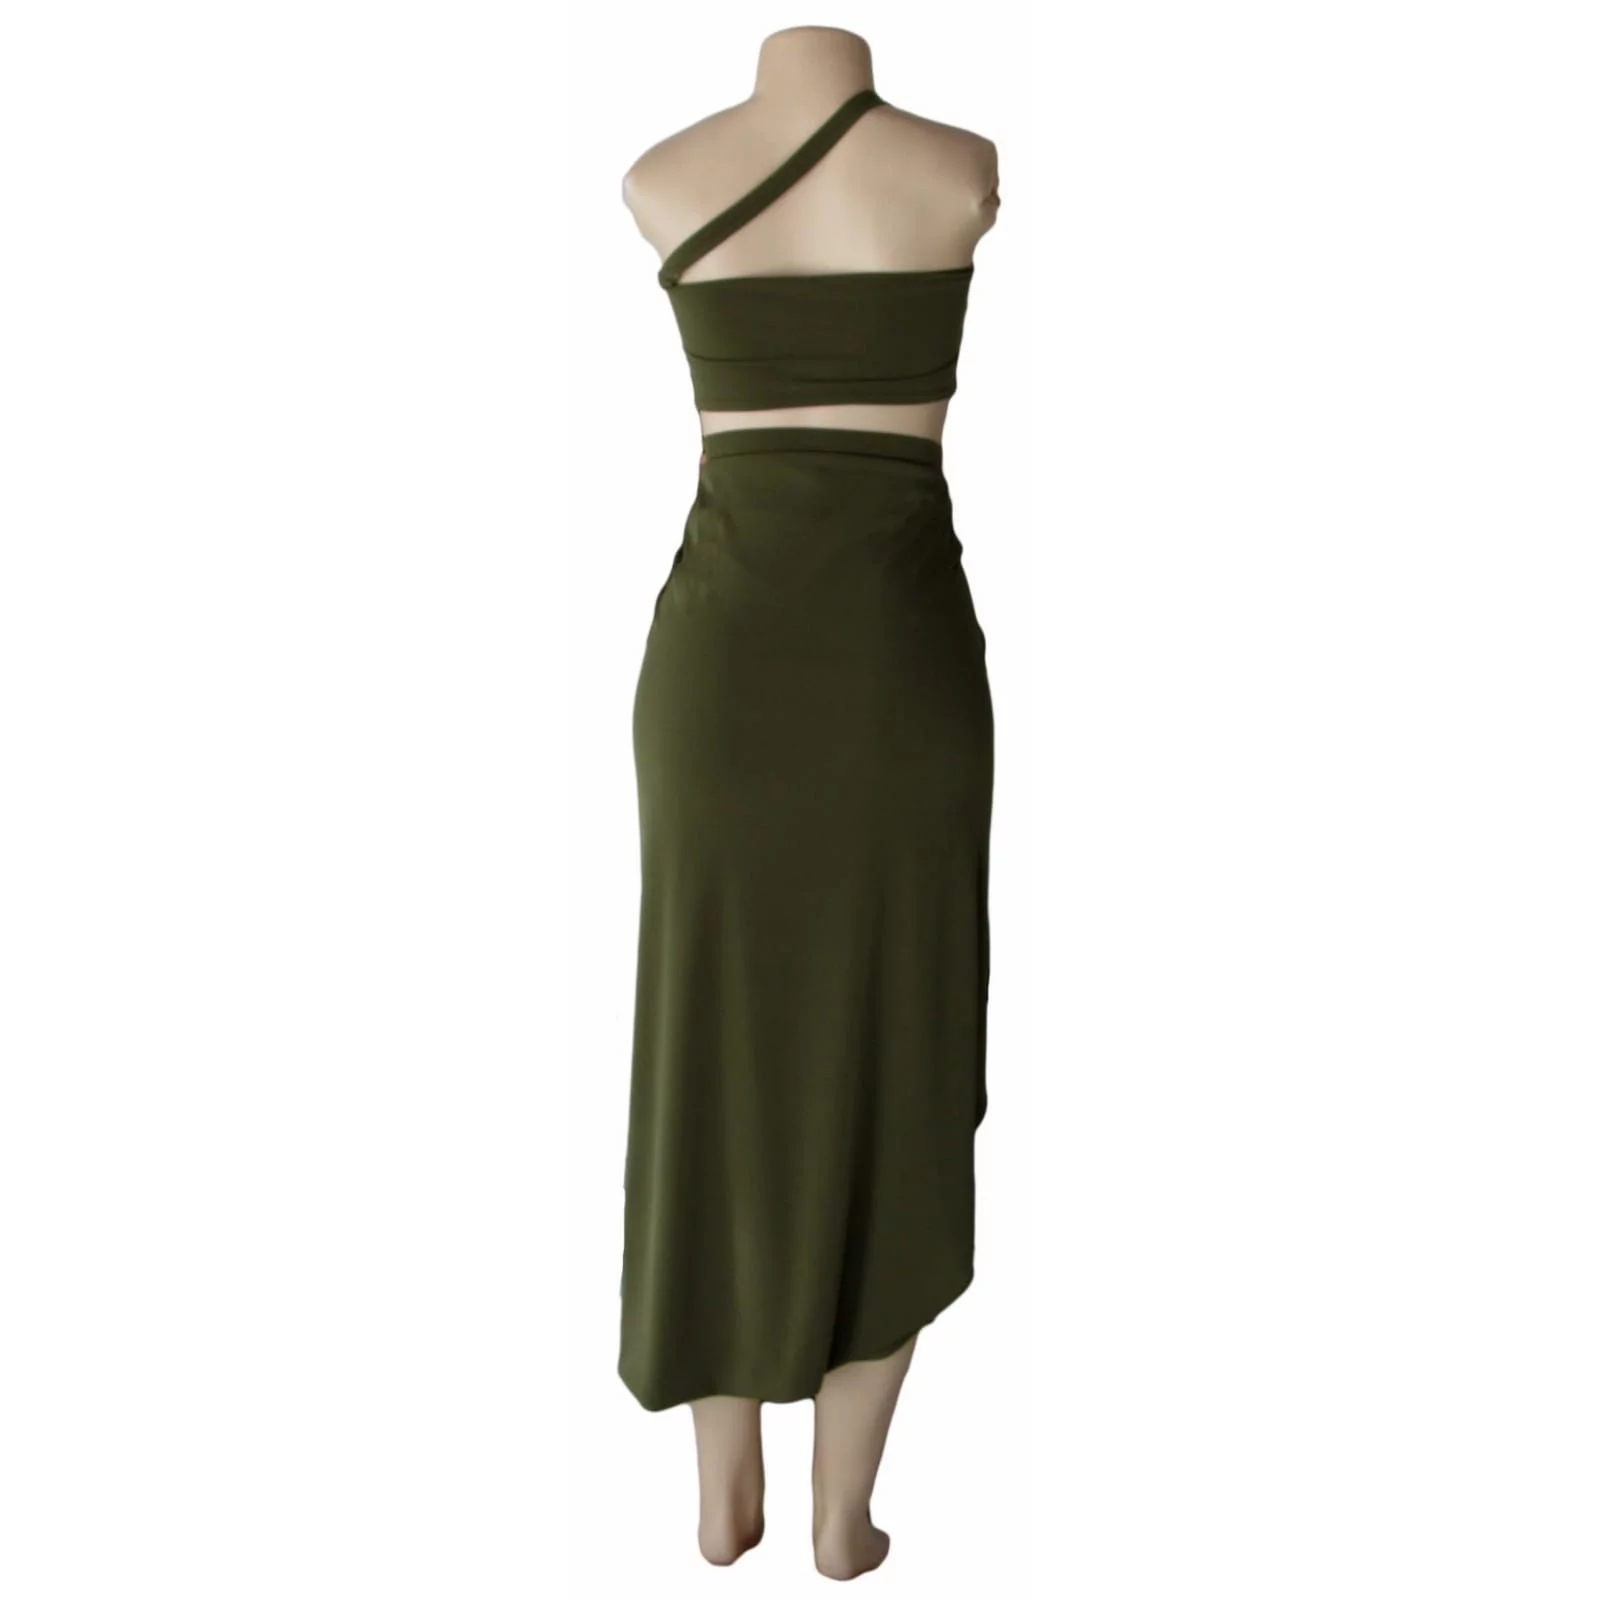 Army green 2 piece smart casual outfit 3 army green 2 piece smart casual outfit with a crop top and a crossed slit fitted skirt